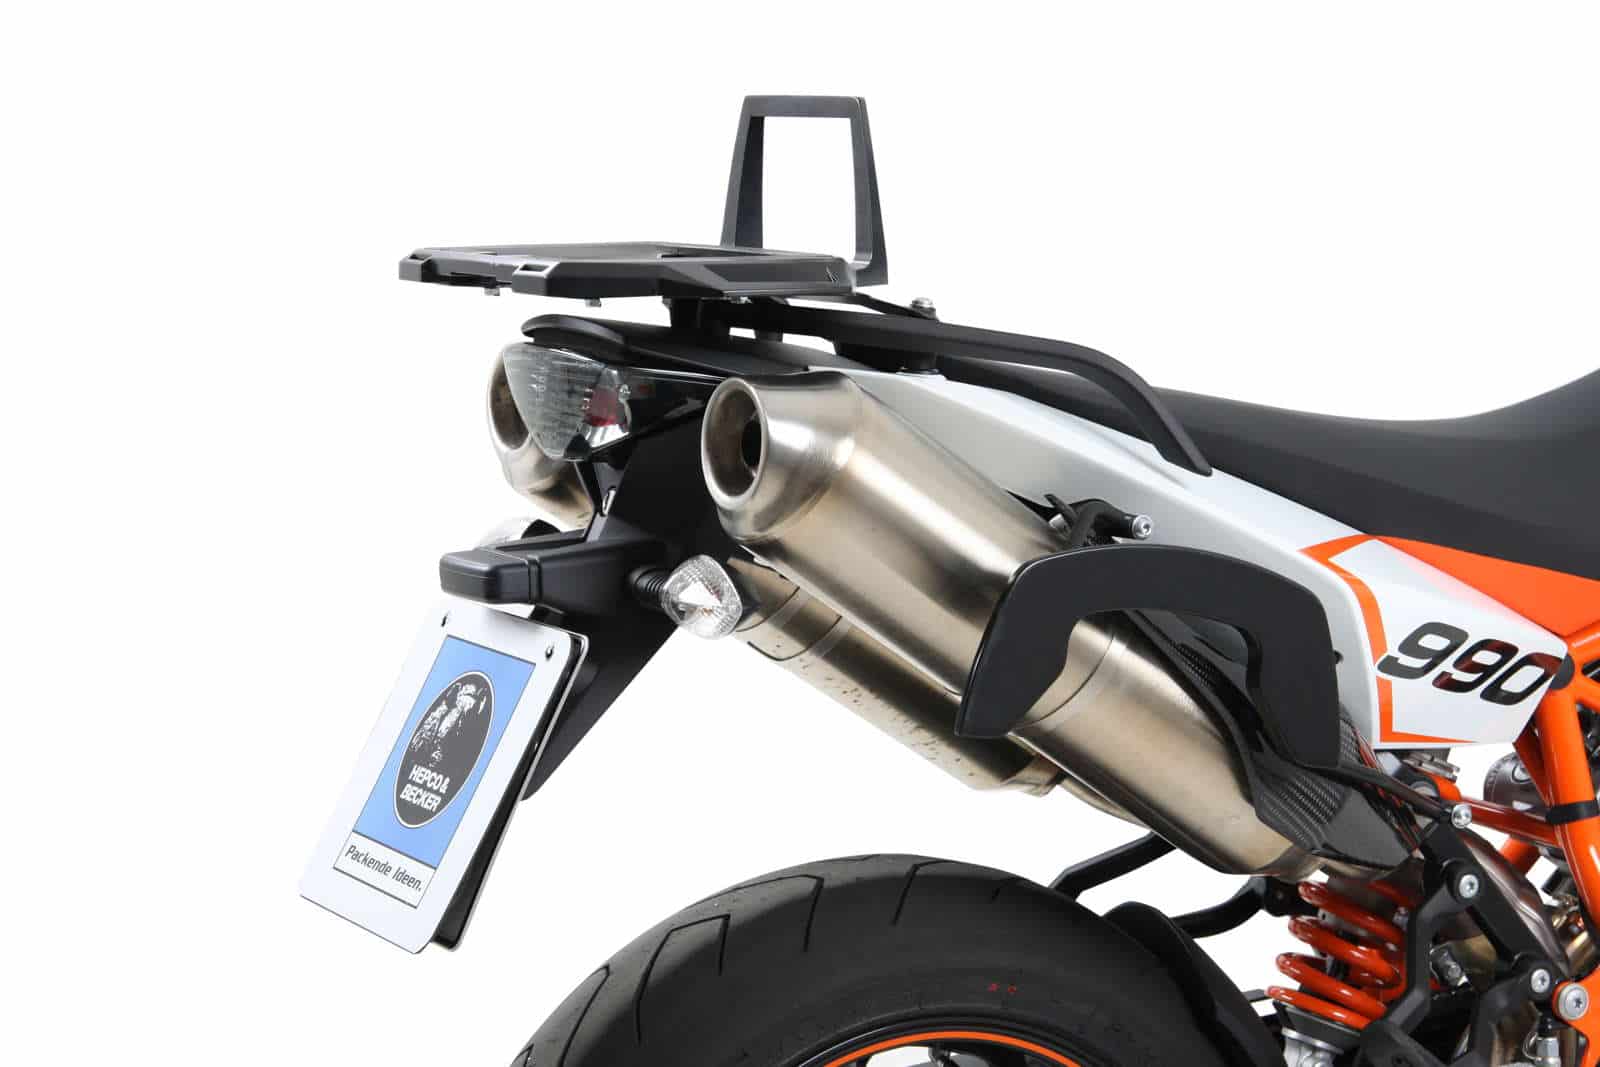 C-Bow sidecarrier for KTM 990 Supermoto R (2011)